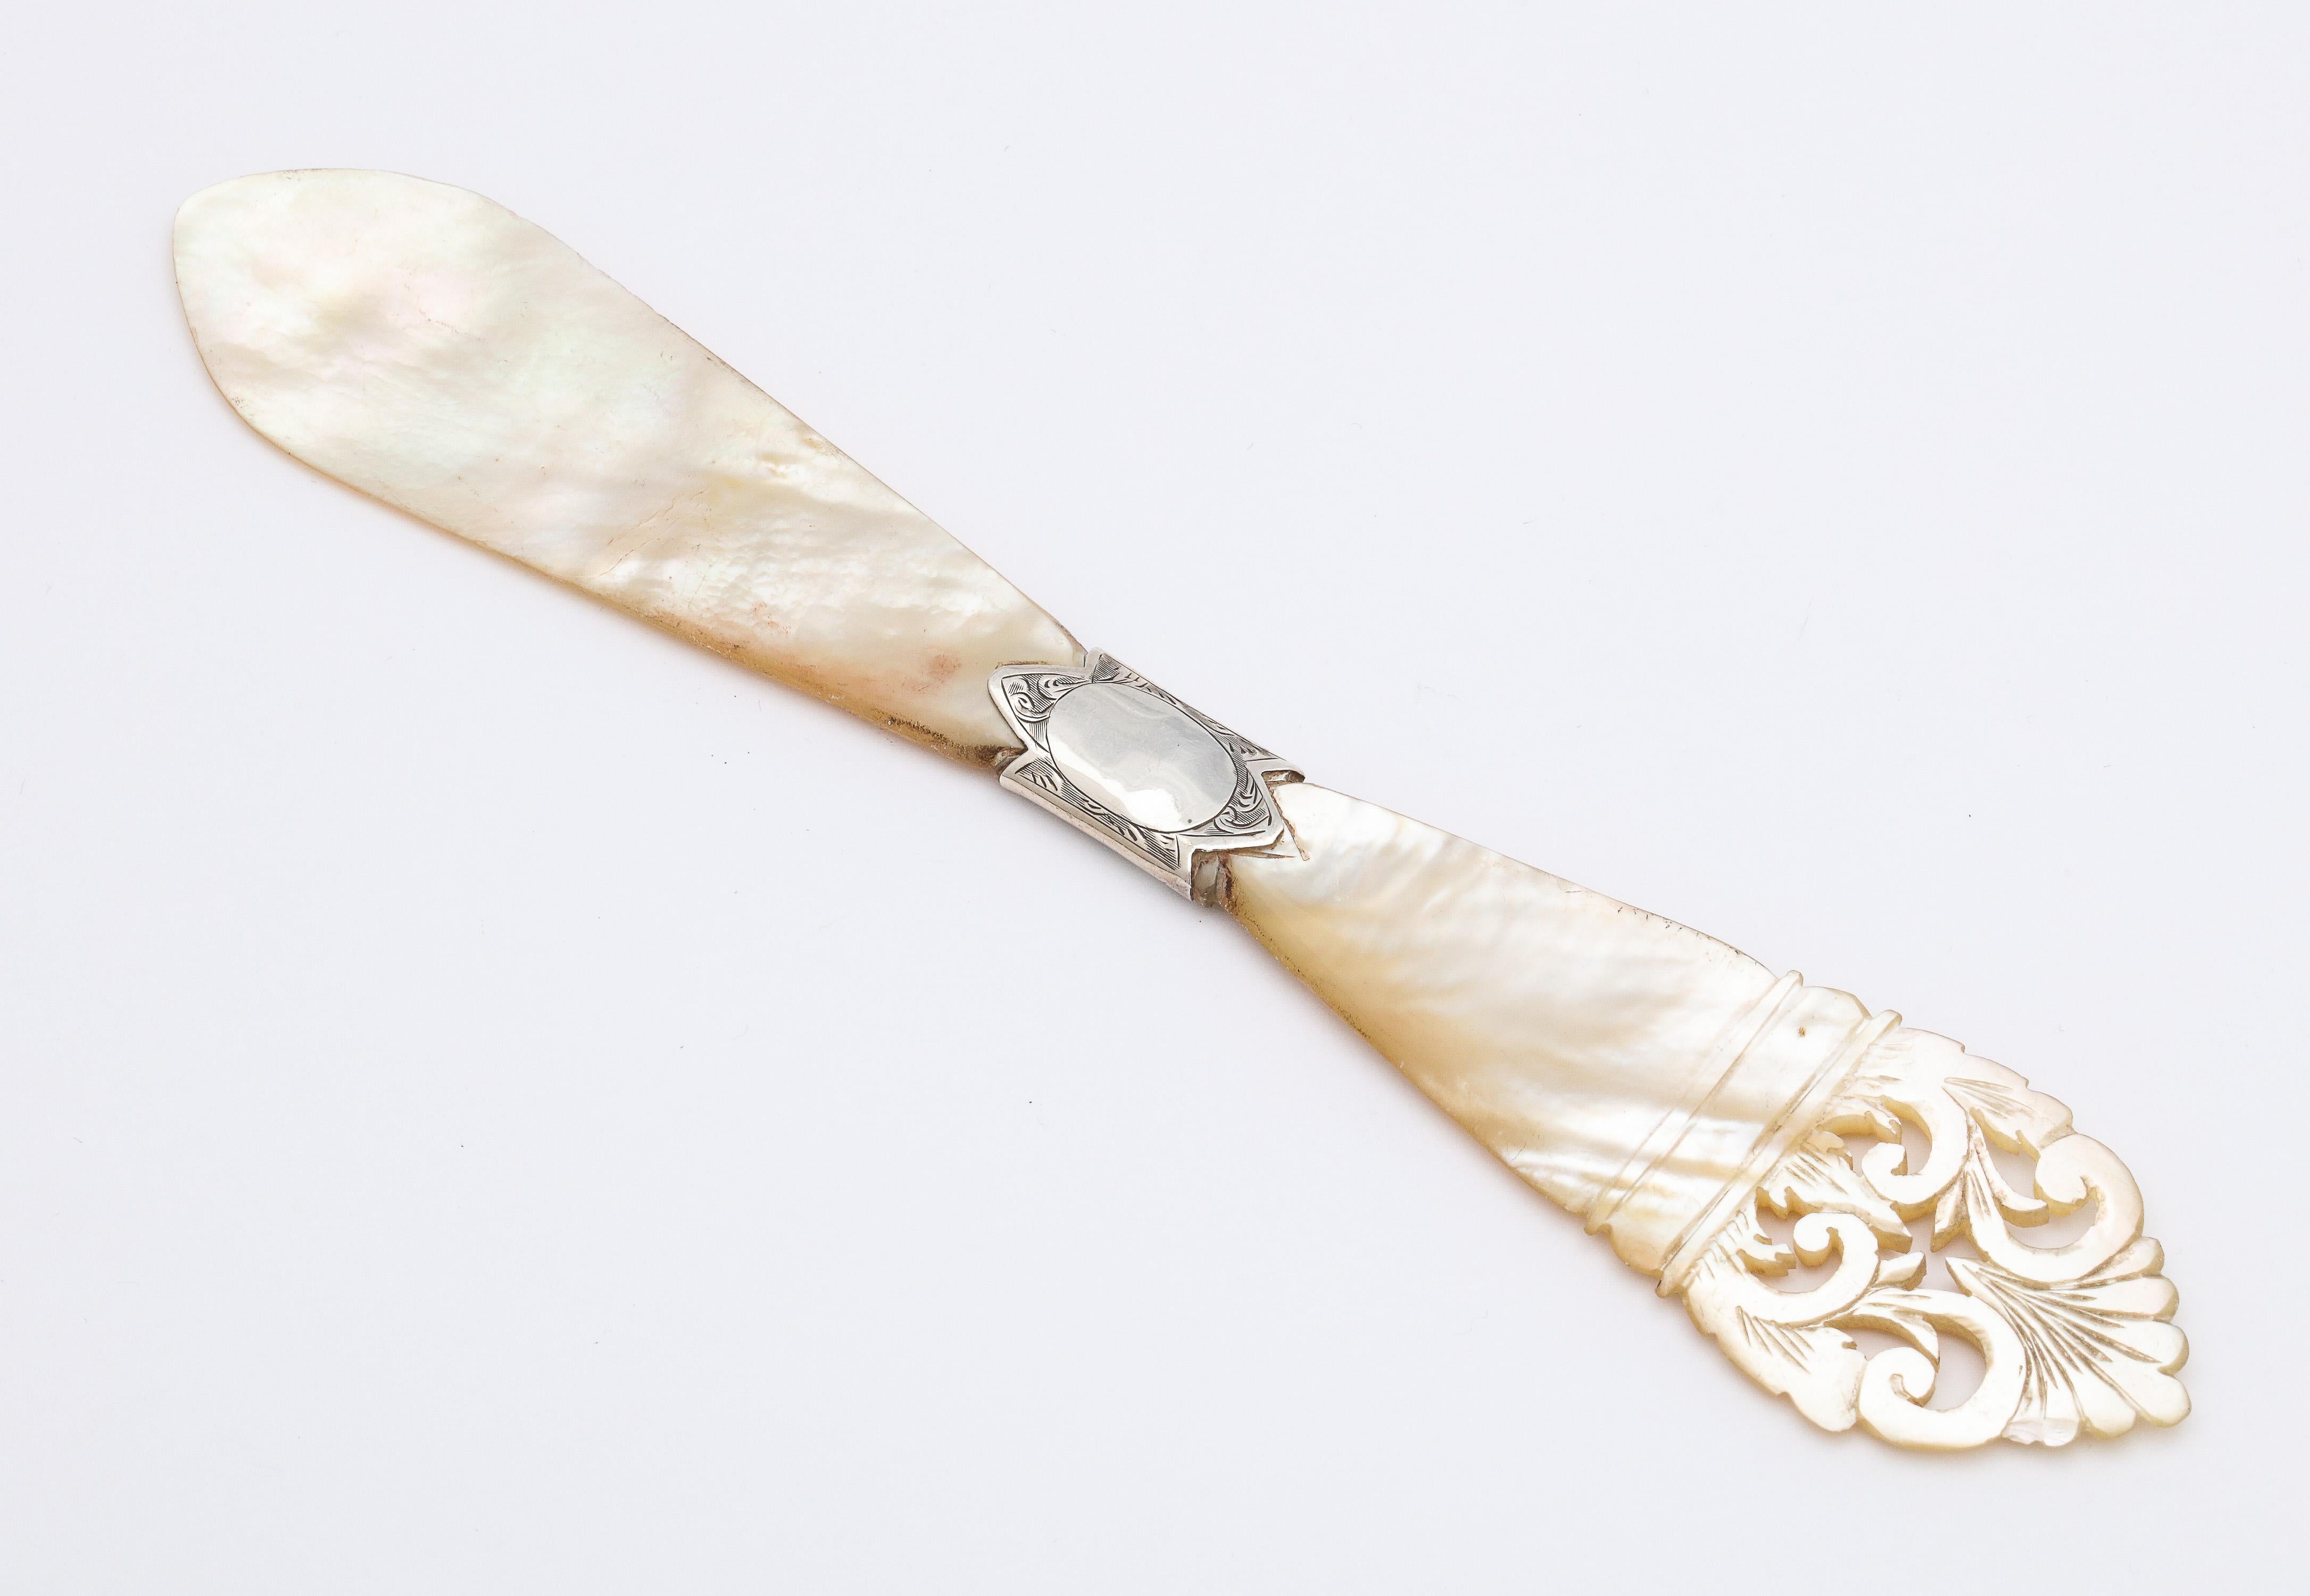 Victorian, sterling silver-mounted mother of pearl letter opener, Birmingham, England, William Warr - maker. Lovely etching on sterling silver mount. Lower portion of mother of pearl handle is pierced in design. Mother of pearl shimmers in the